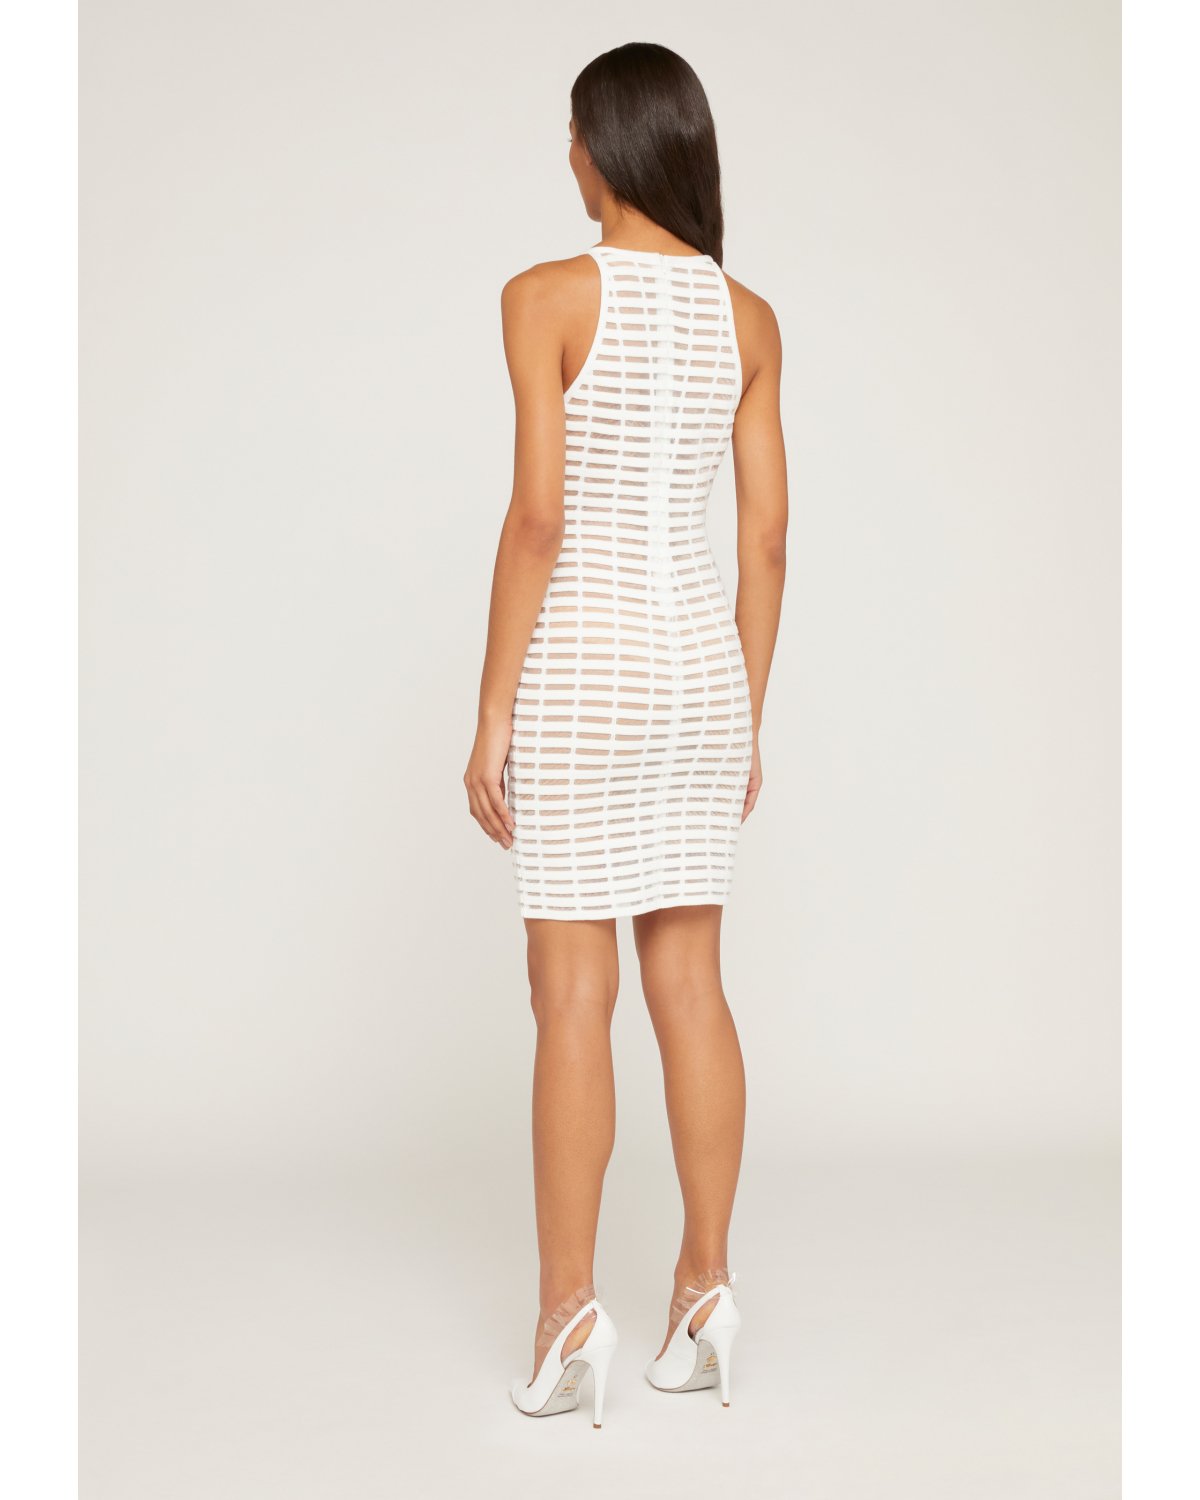 Knitted iconic dress | Iconic Capsule Collection, 73_74 | Genny